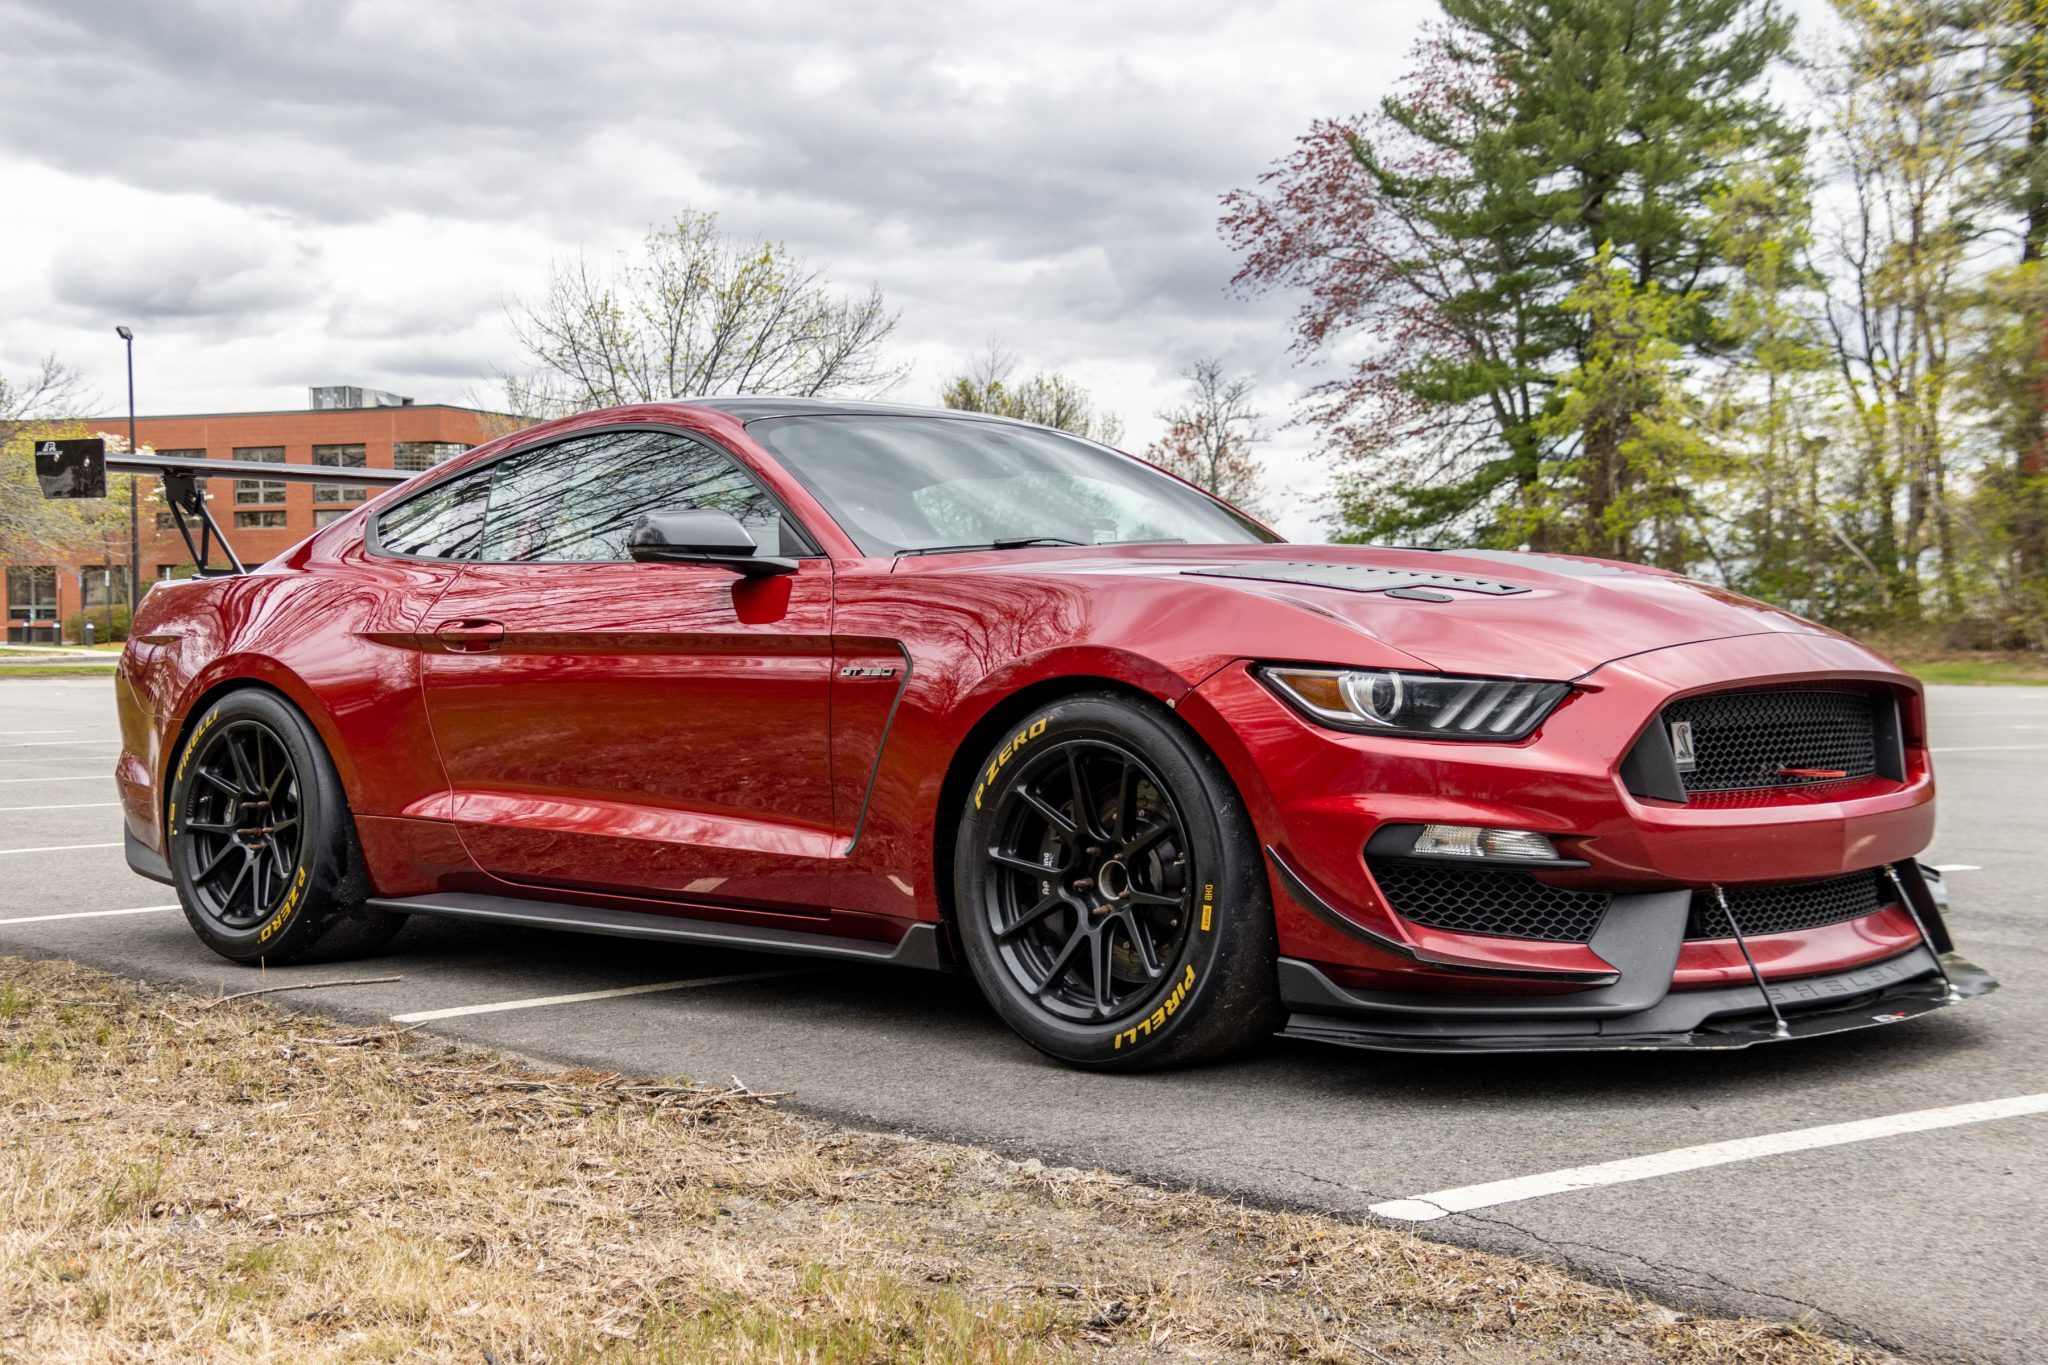 Ford Mustang Gt350 2018